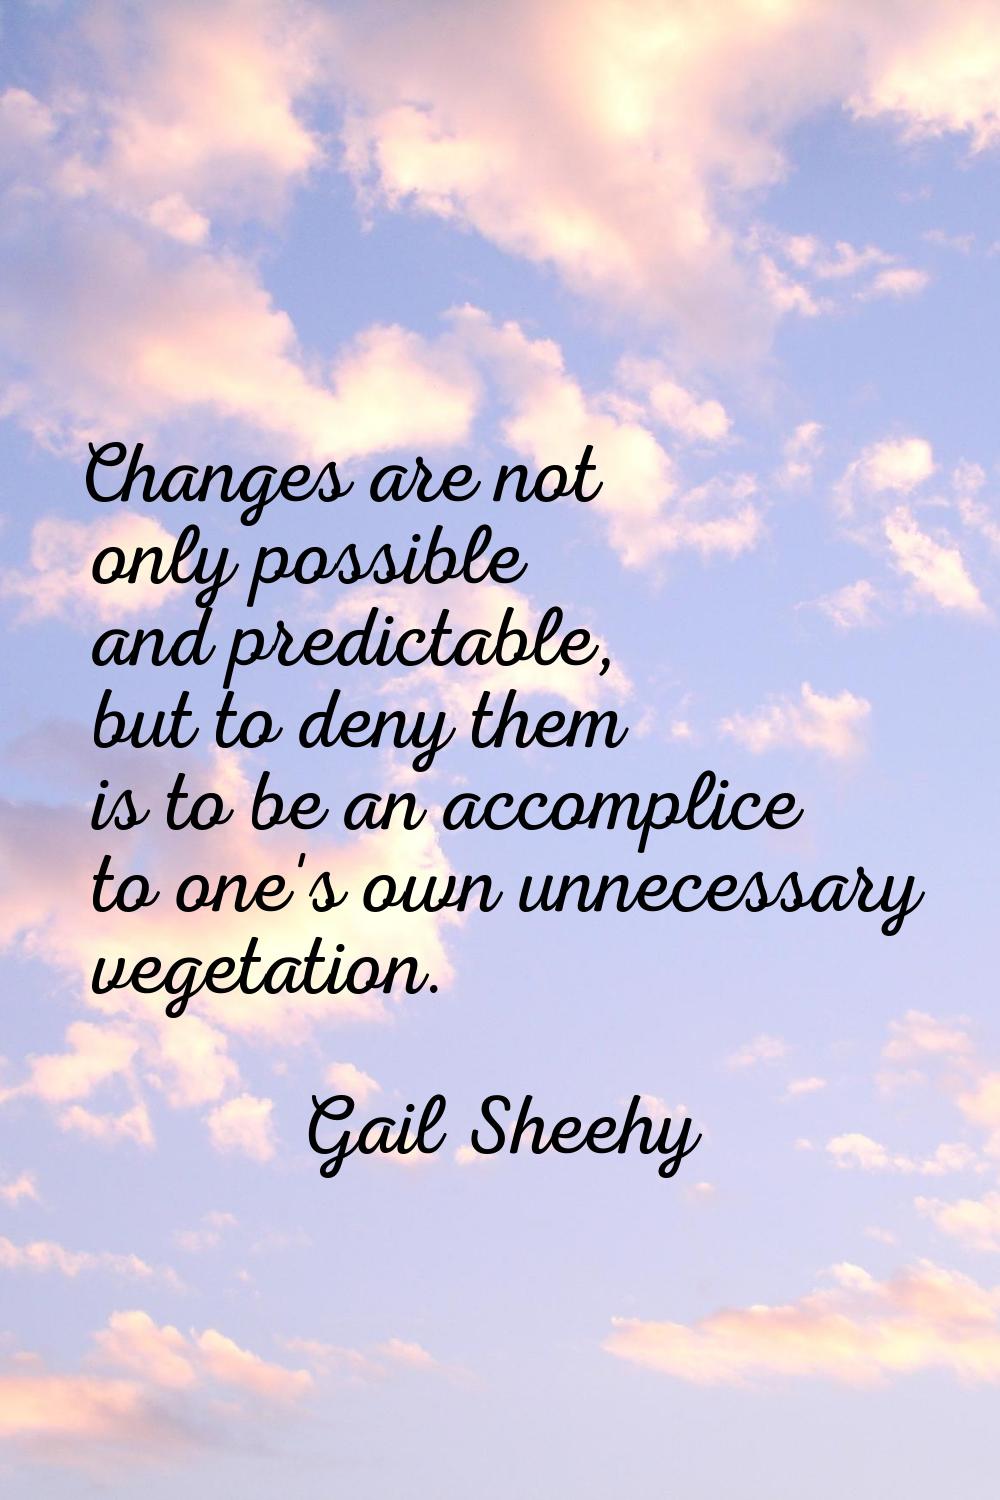 Changes are not only possible and predictable, but to deny them is to be an accomplice to one's own